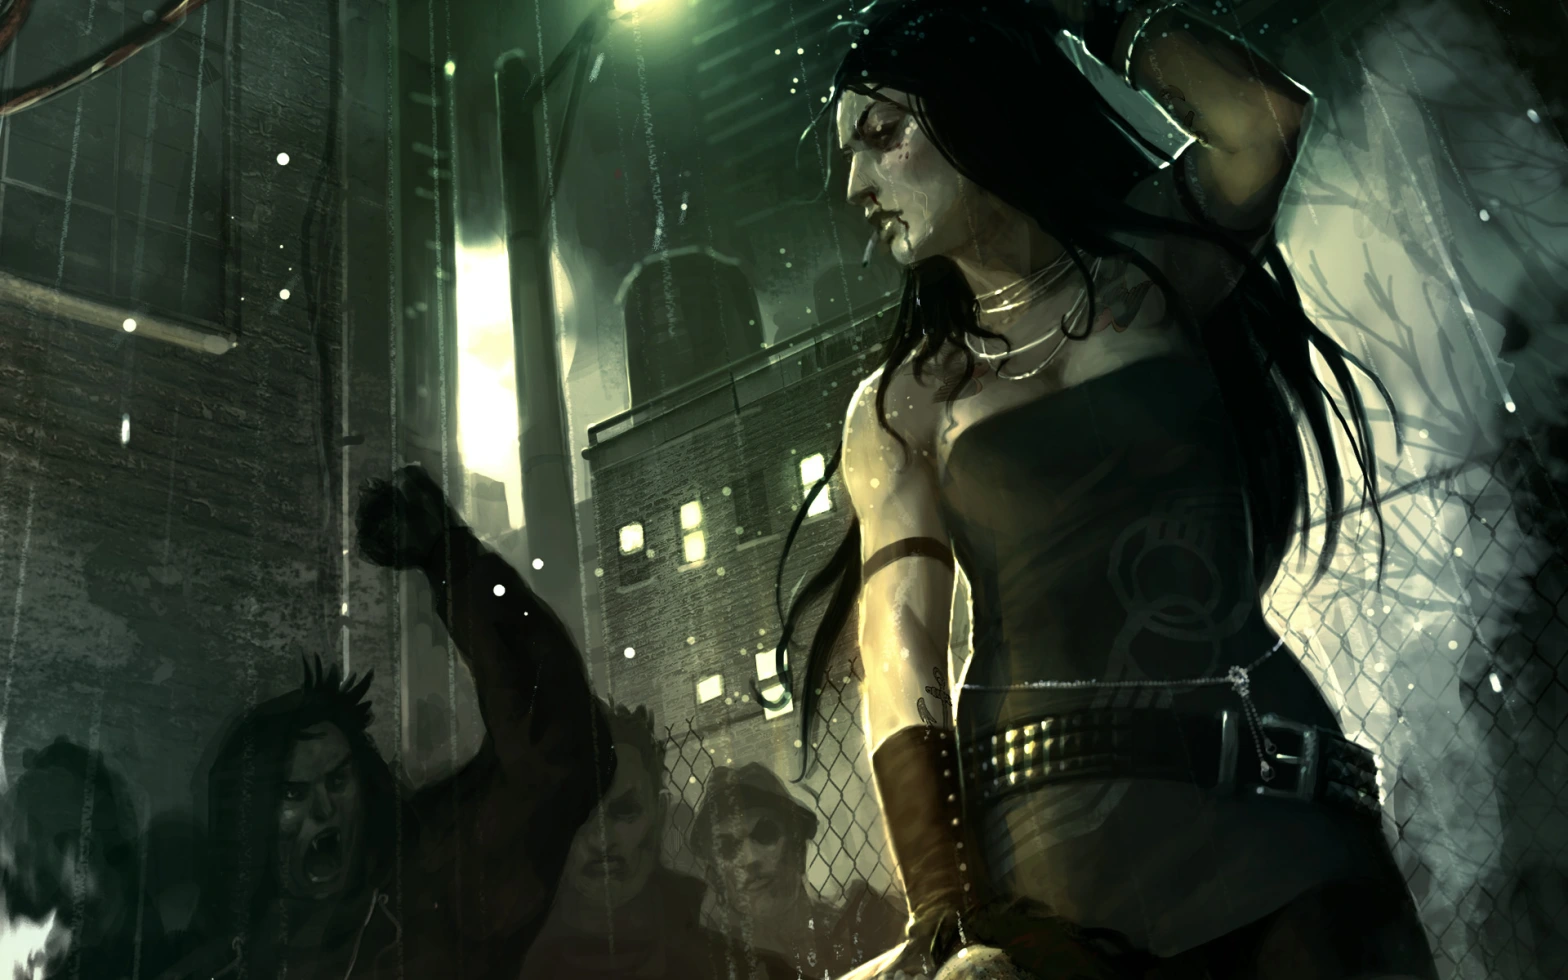 Vampire: The Masquerade V5 - War of Ages is the game's first